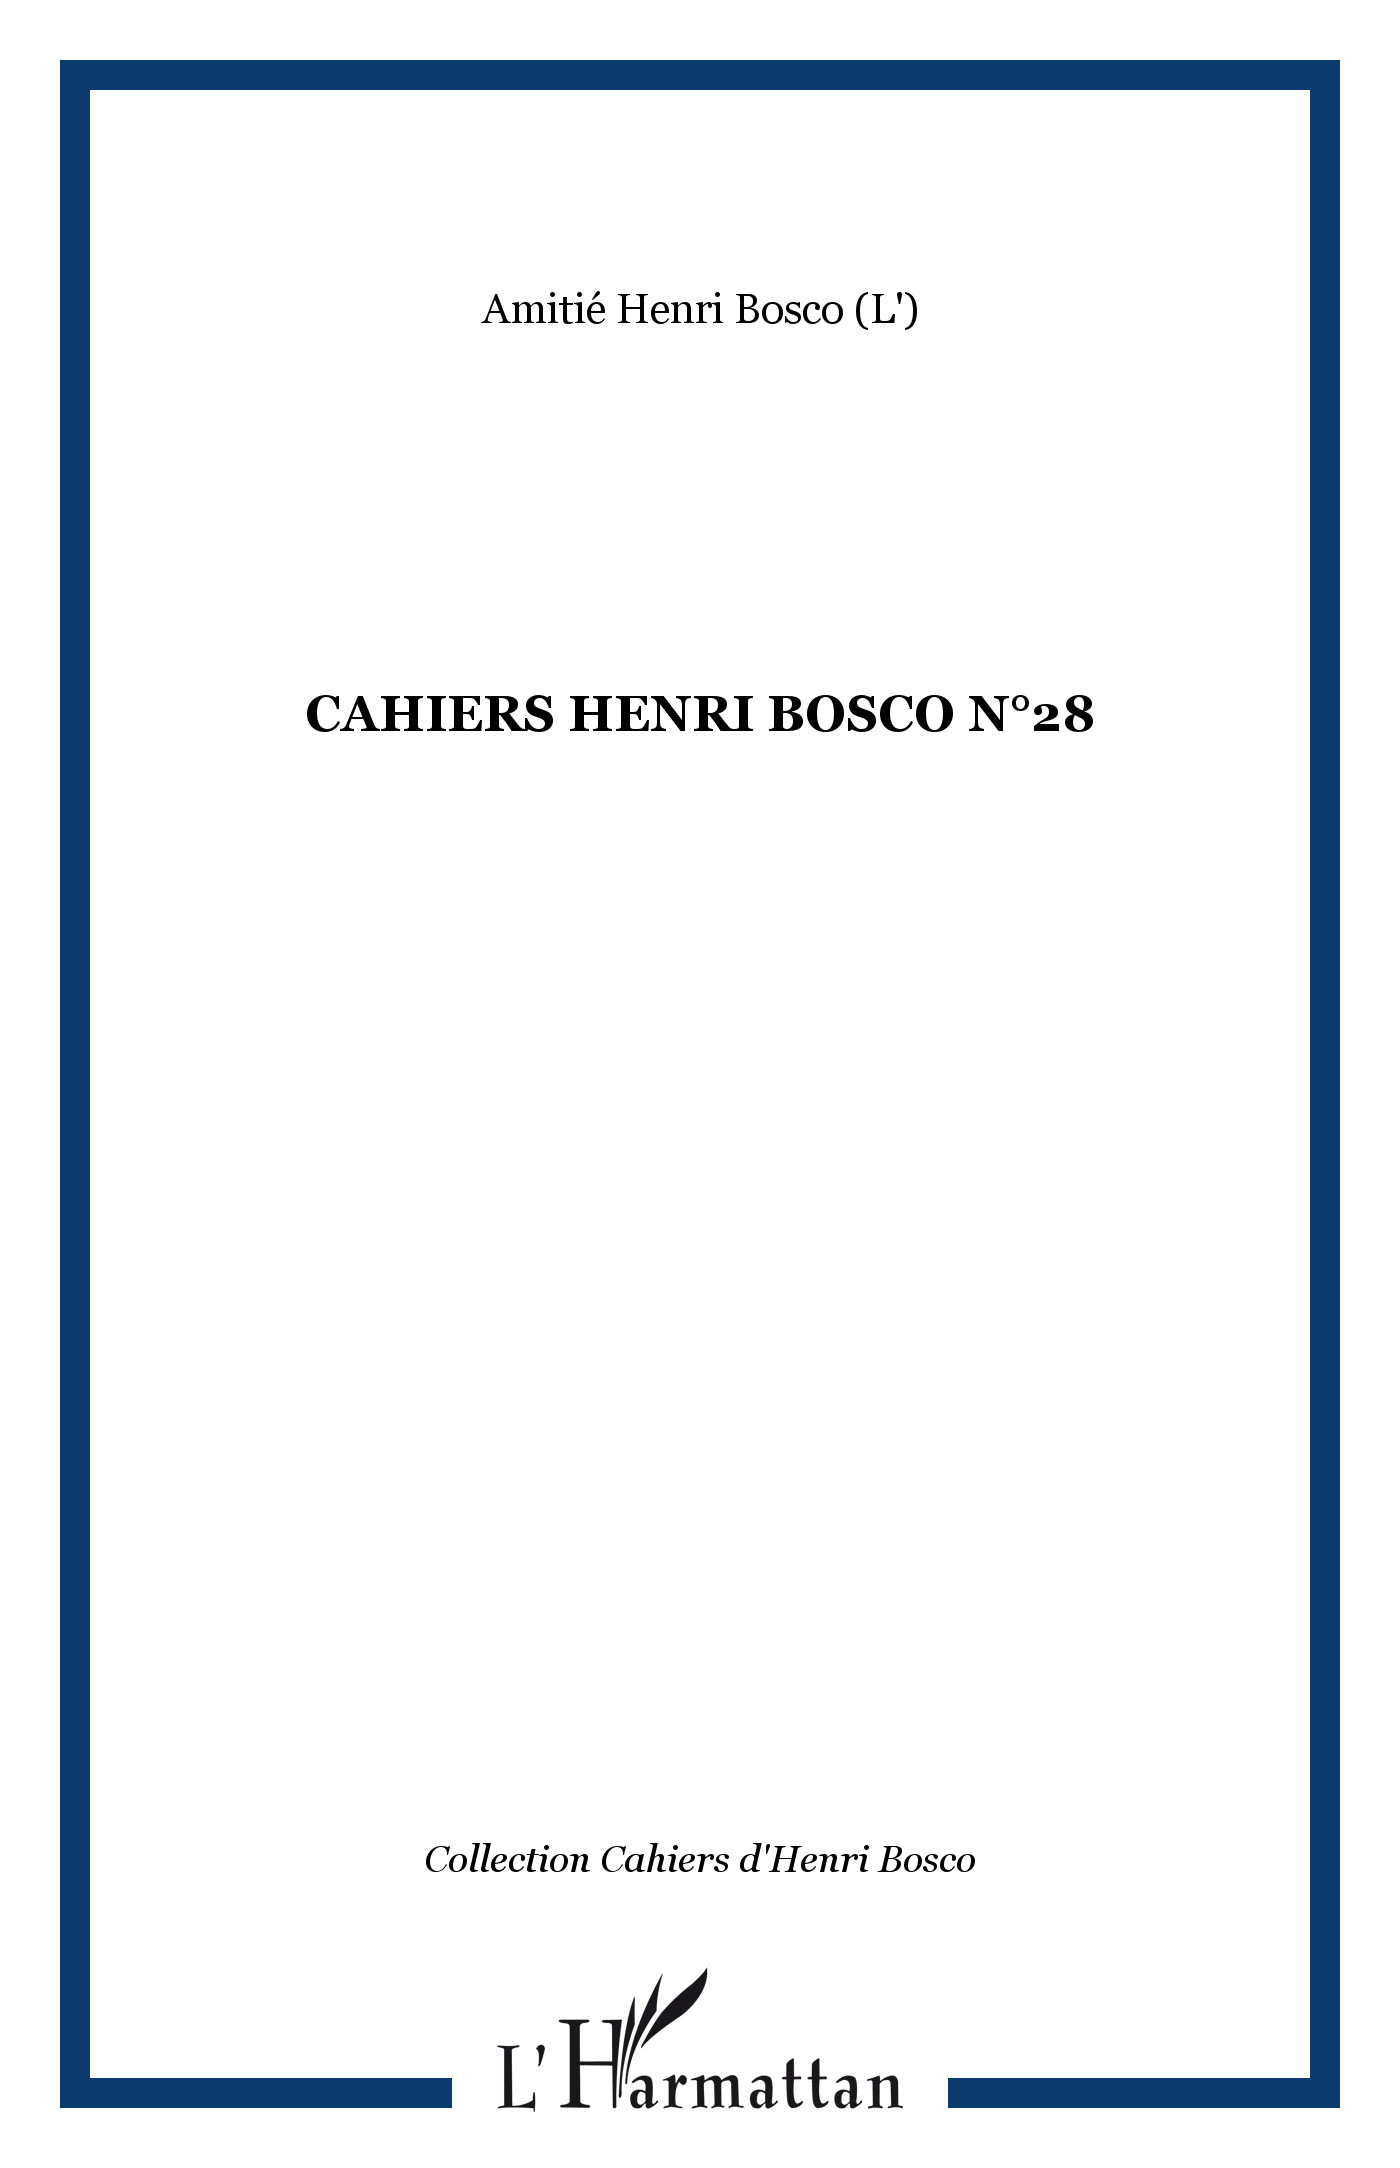 CAHIERS HENRI BOSCO N°28 (9782296072879-front-cover)